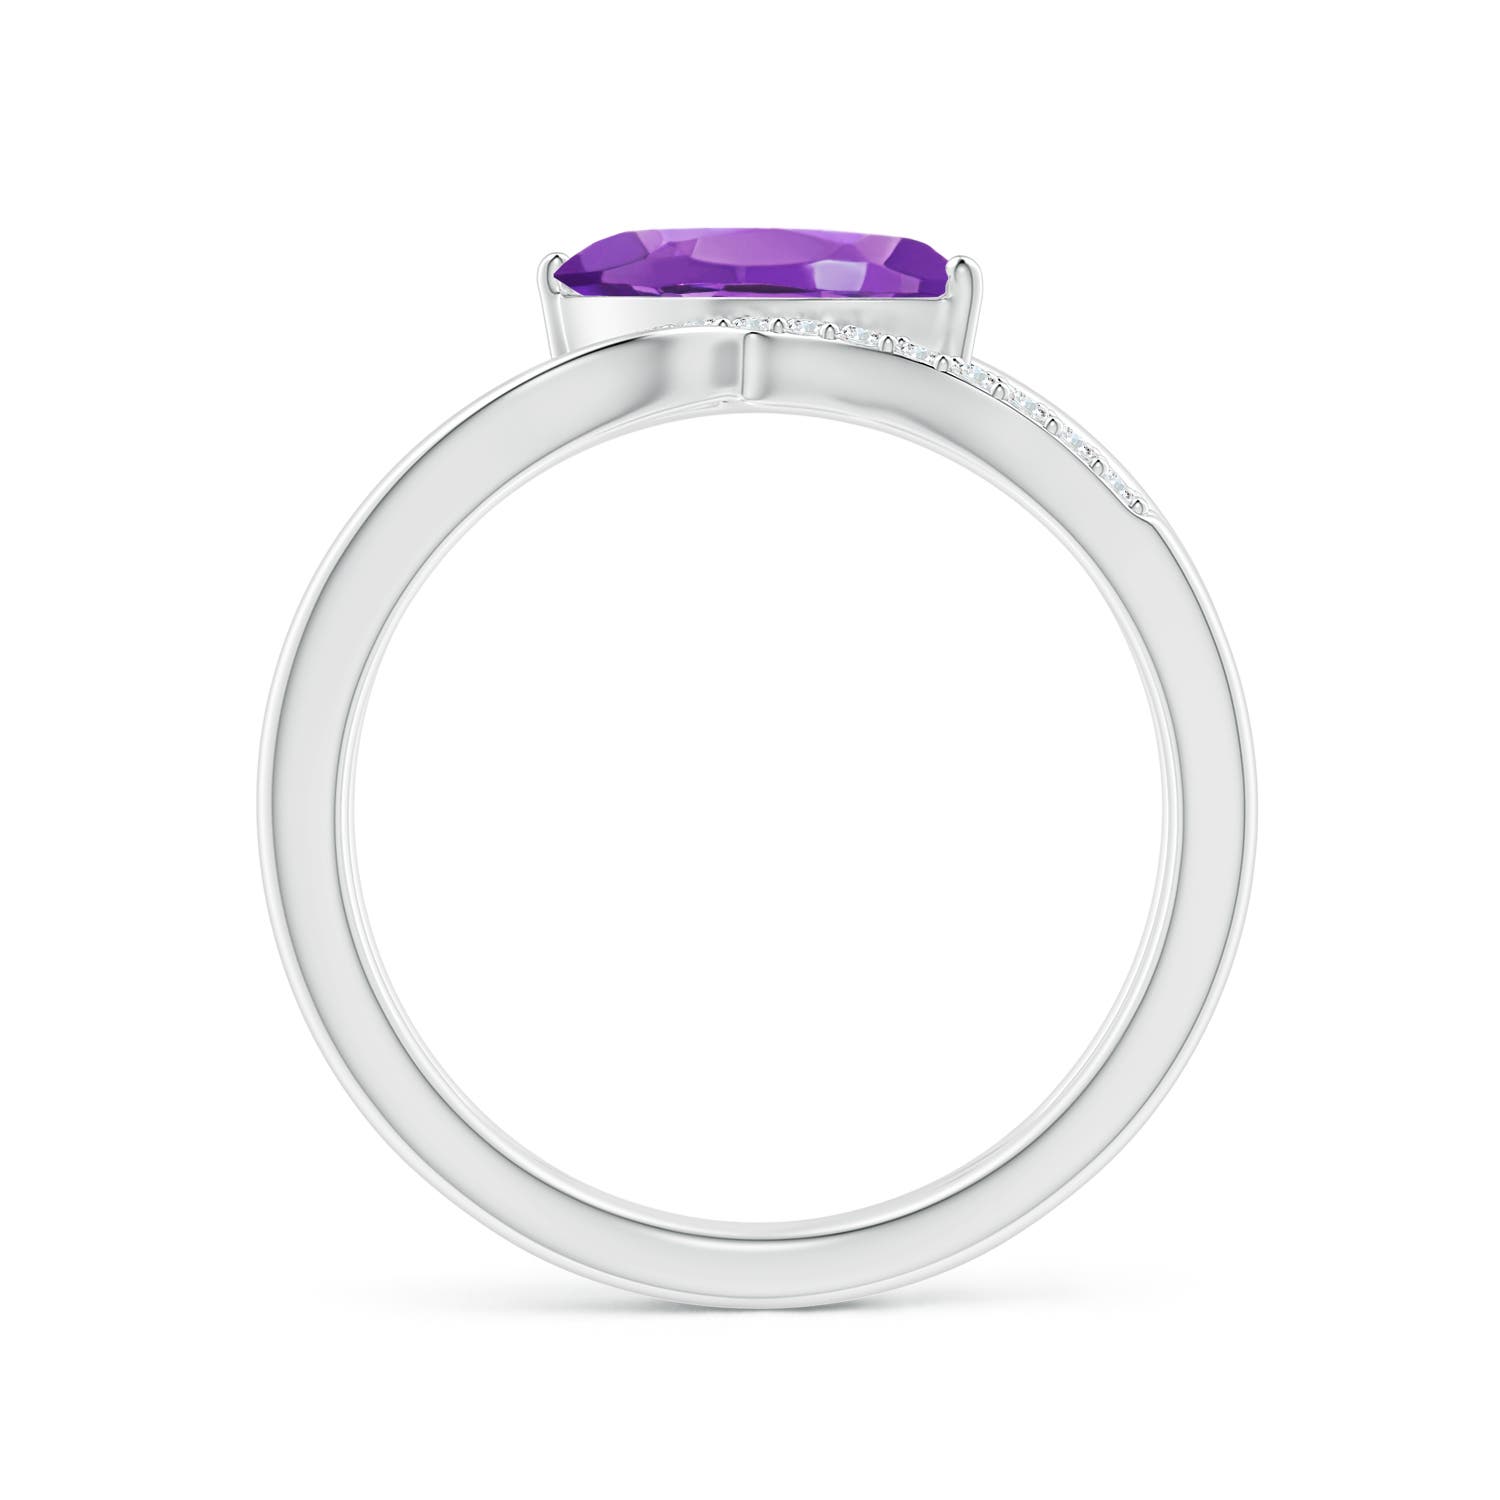 AAA - Amethyst / 1.13 CT / 14 KT White Gold